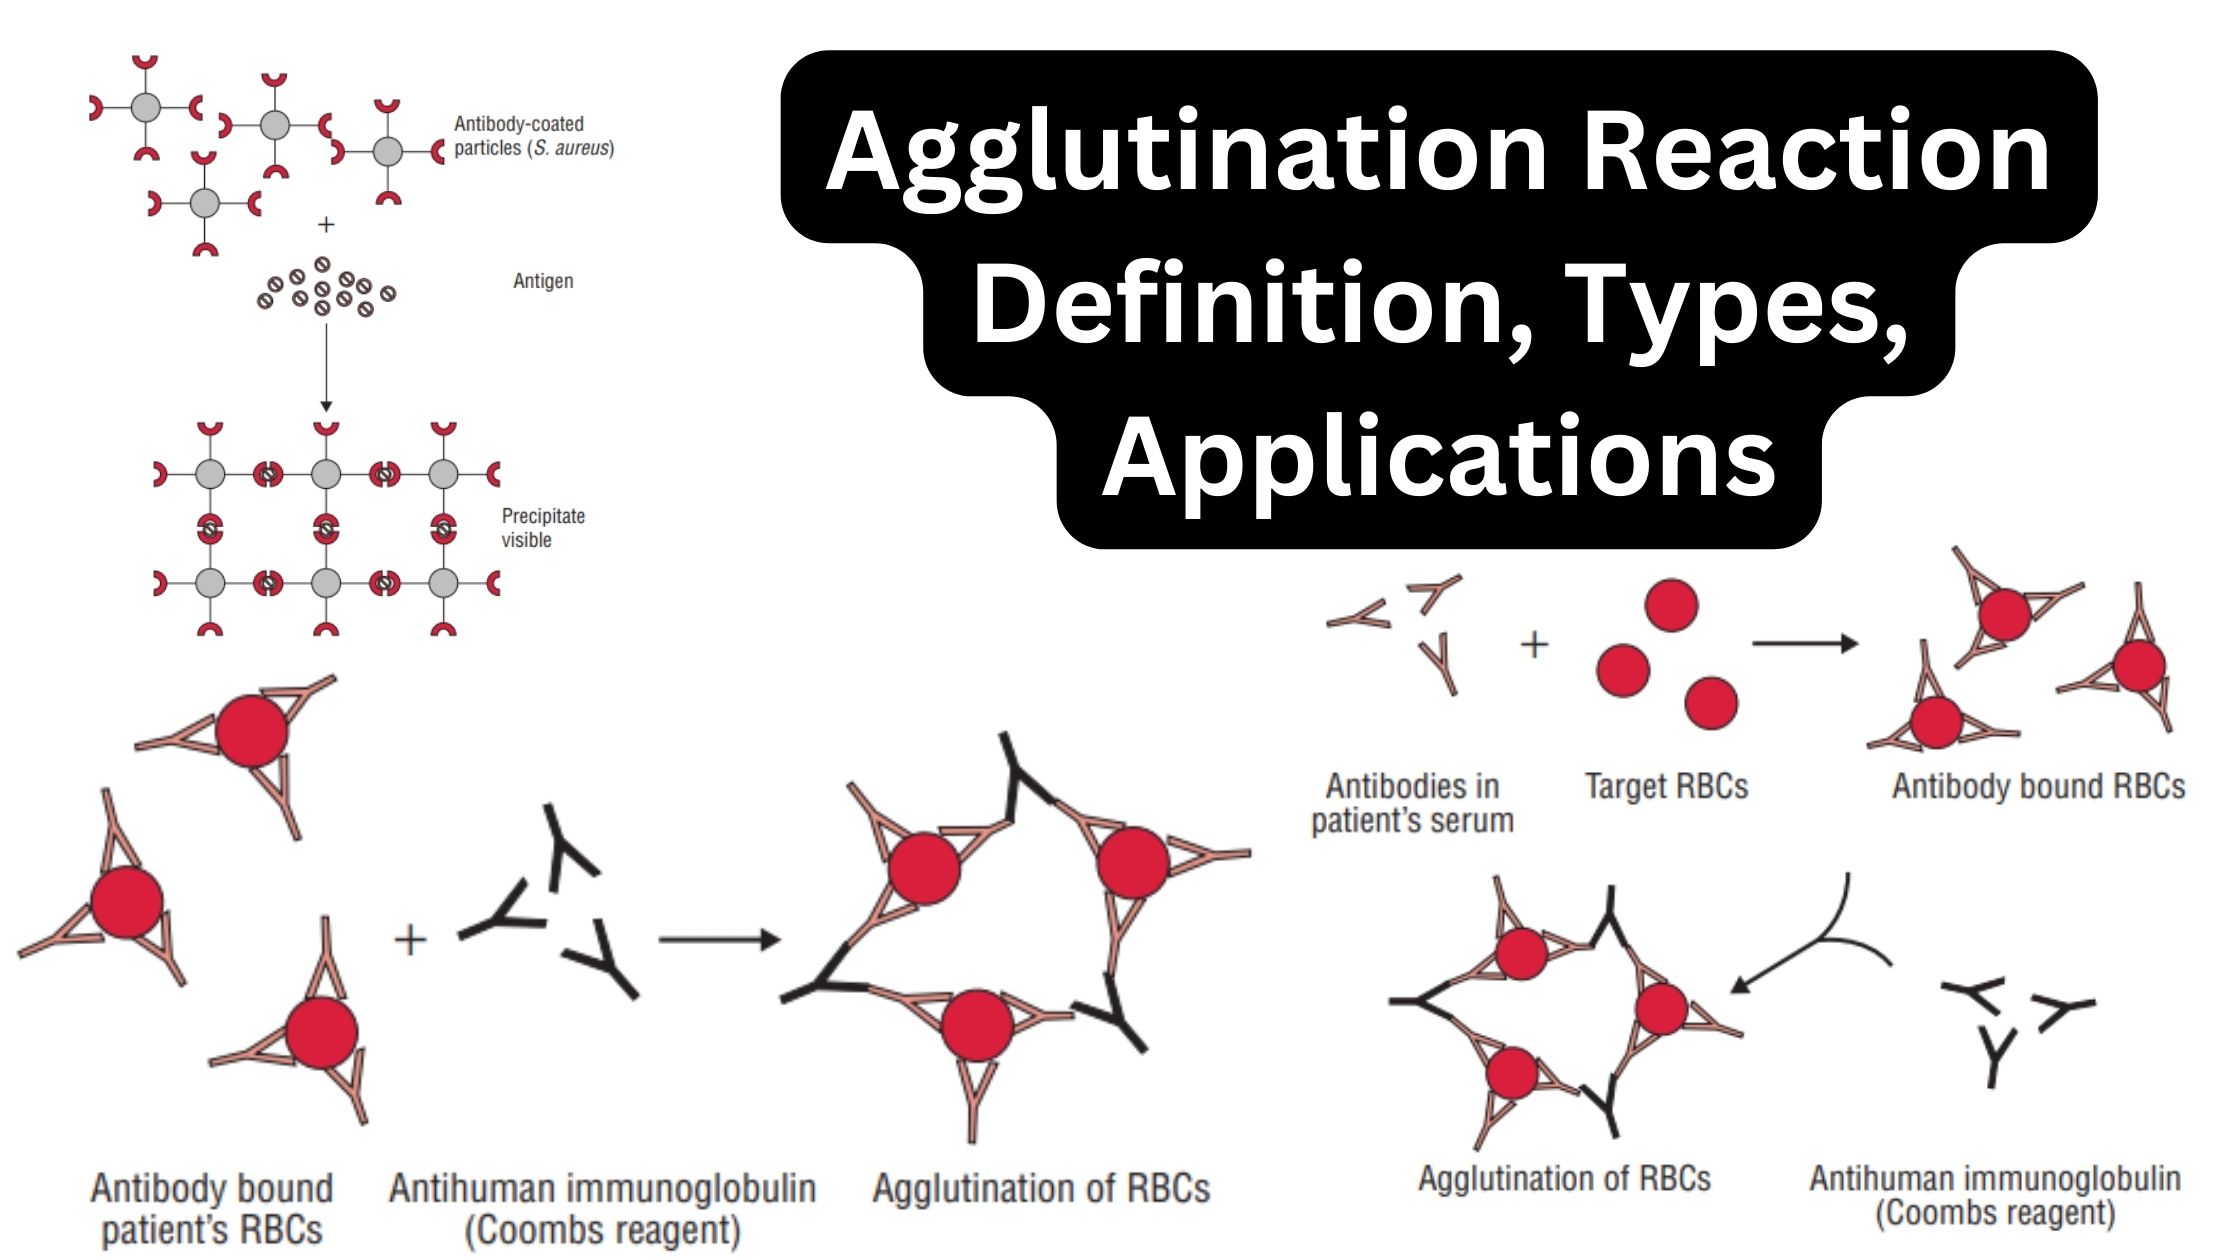 Agglutination Reaction Definition, Types, Applications